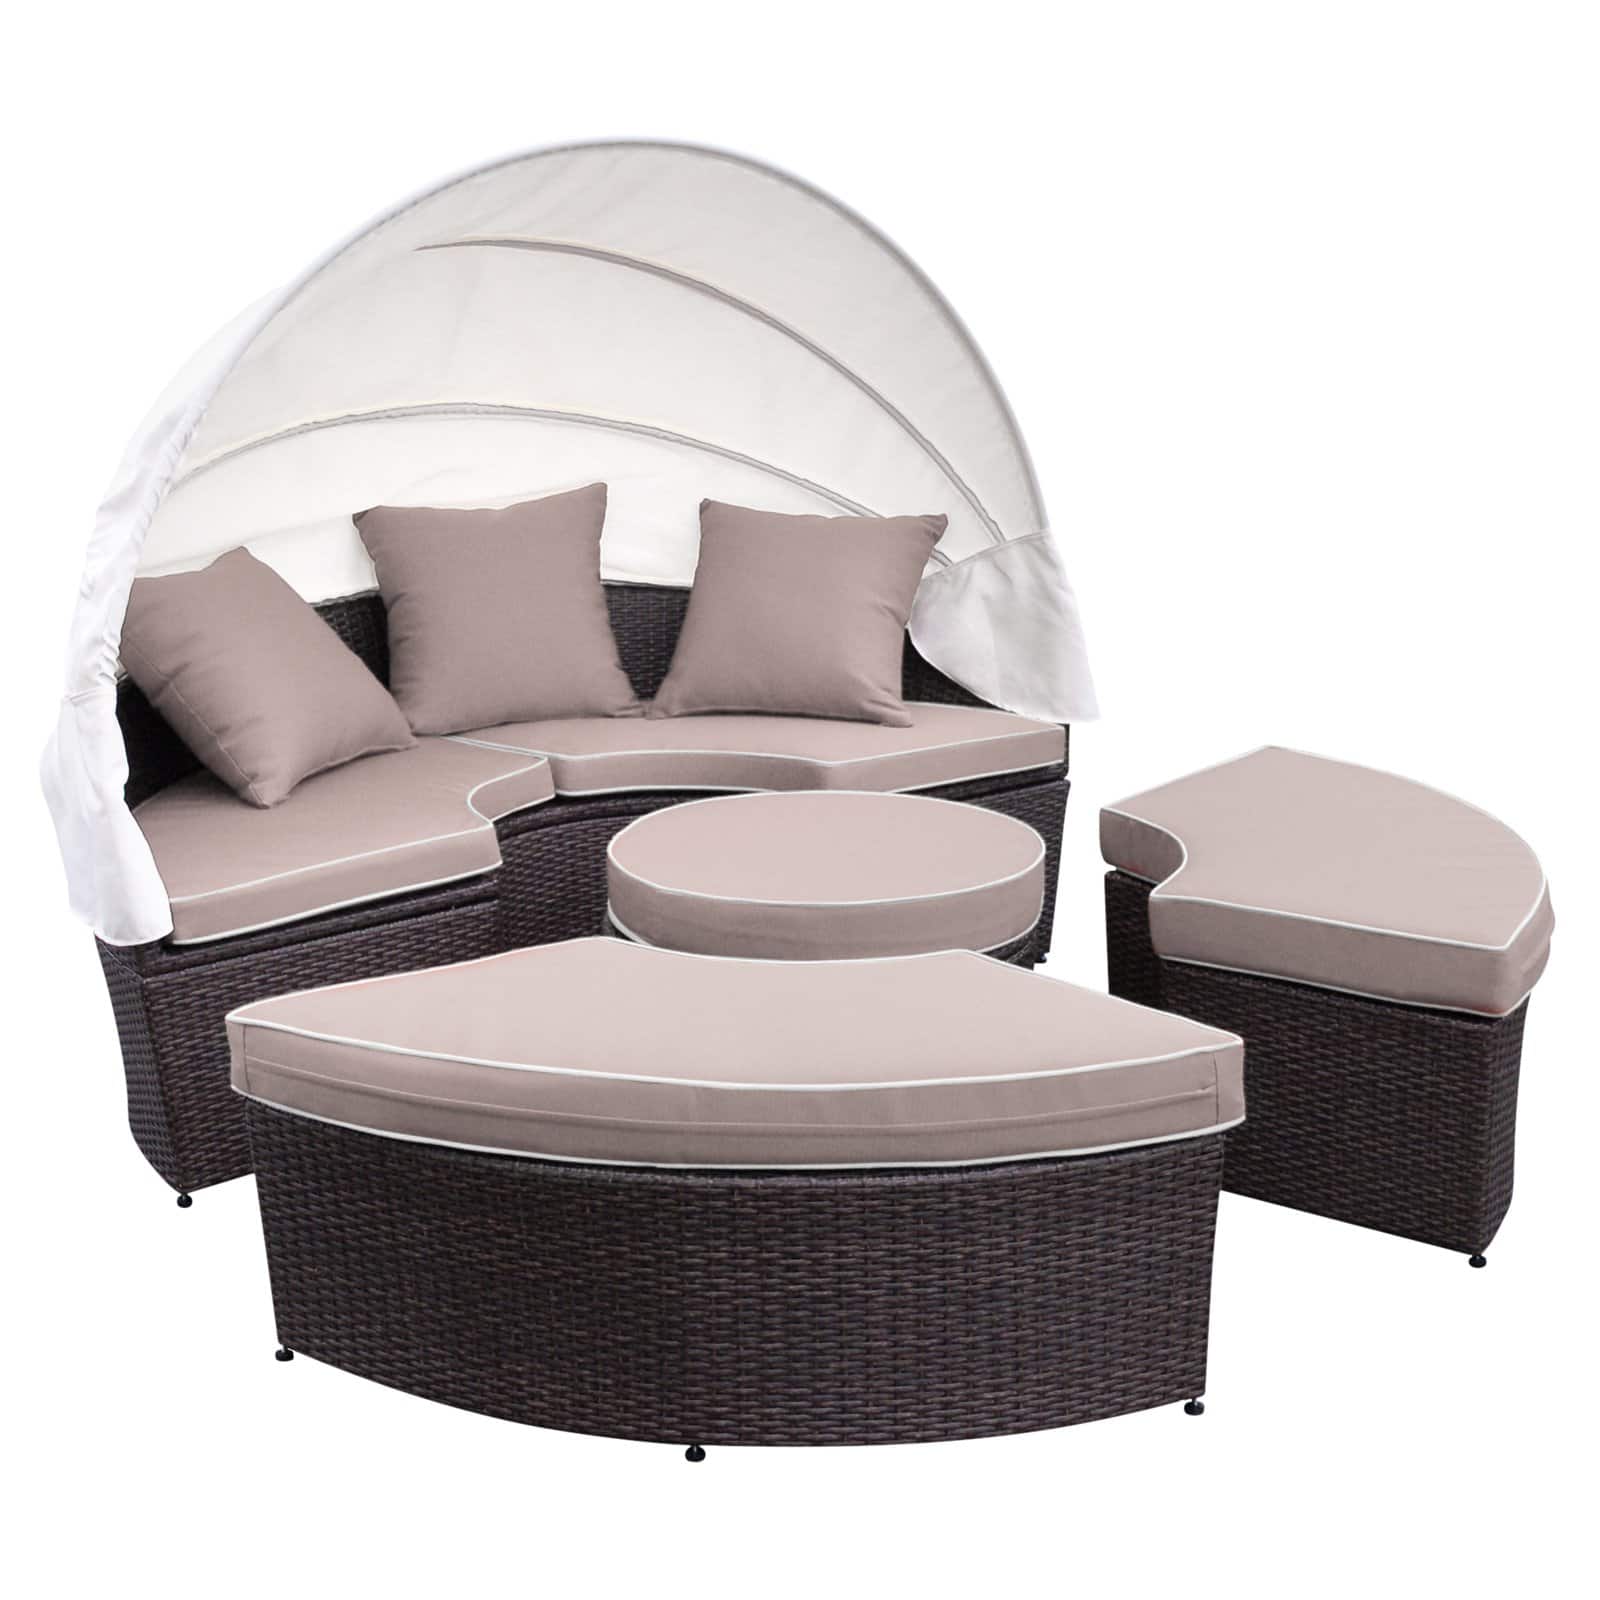 Jeco All-Weather Wicker Sectional Patio Daybed with Cushion - image 3 of 8